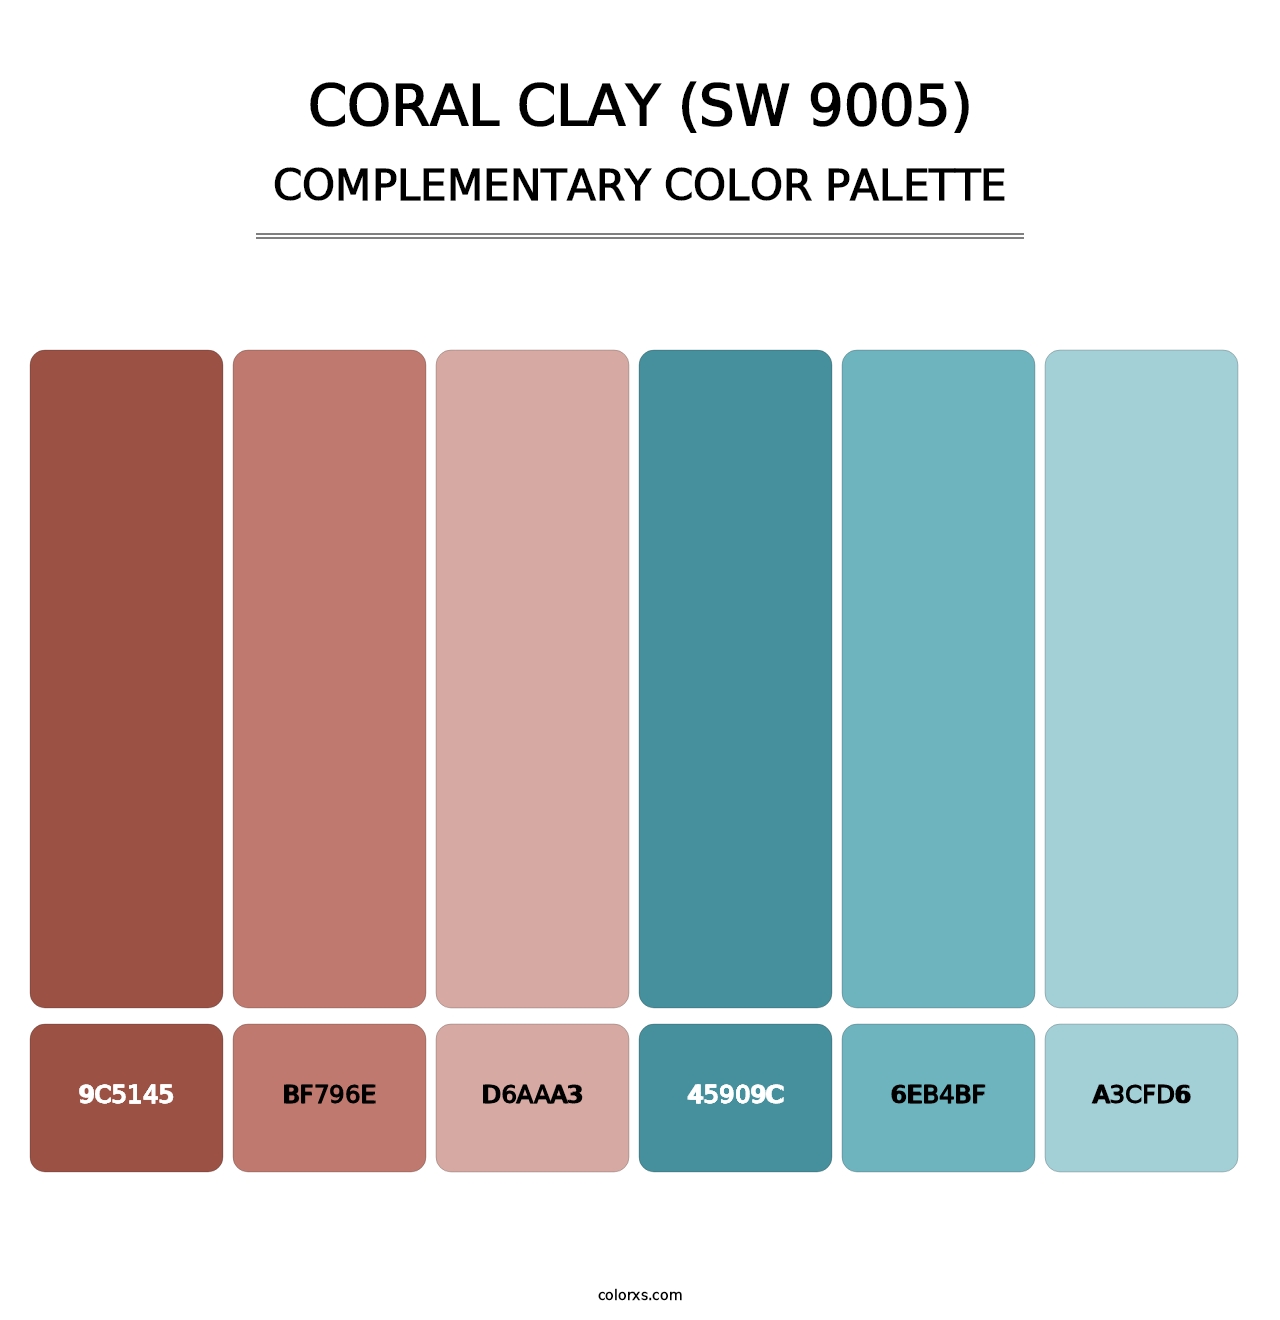 Coral Clay (SW 9005) - Complementary Color Palette